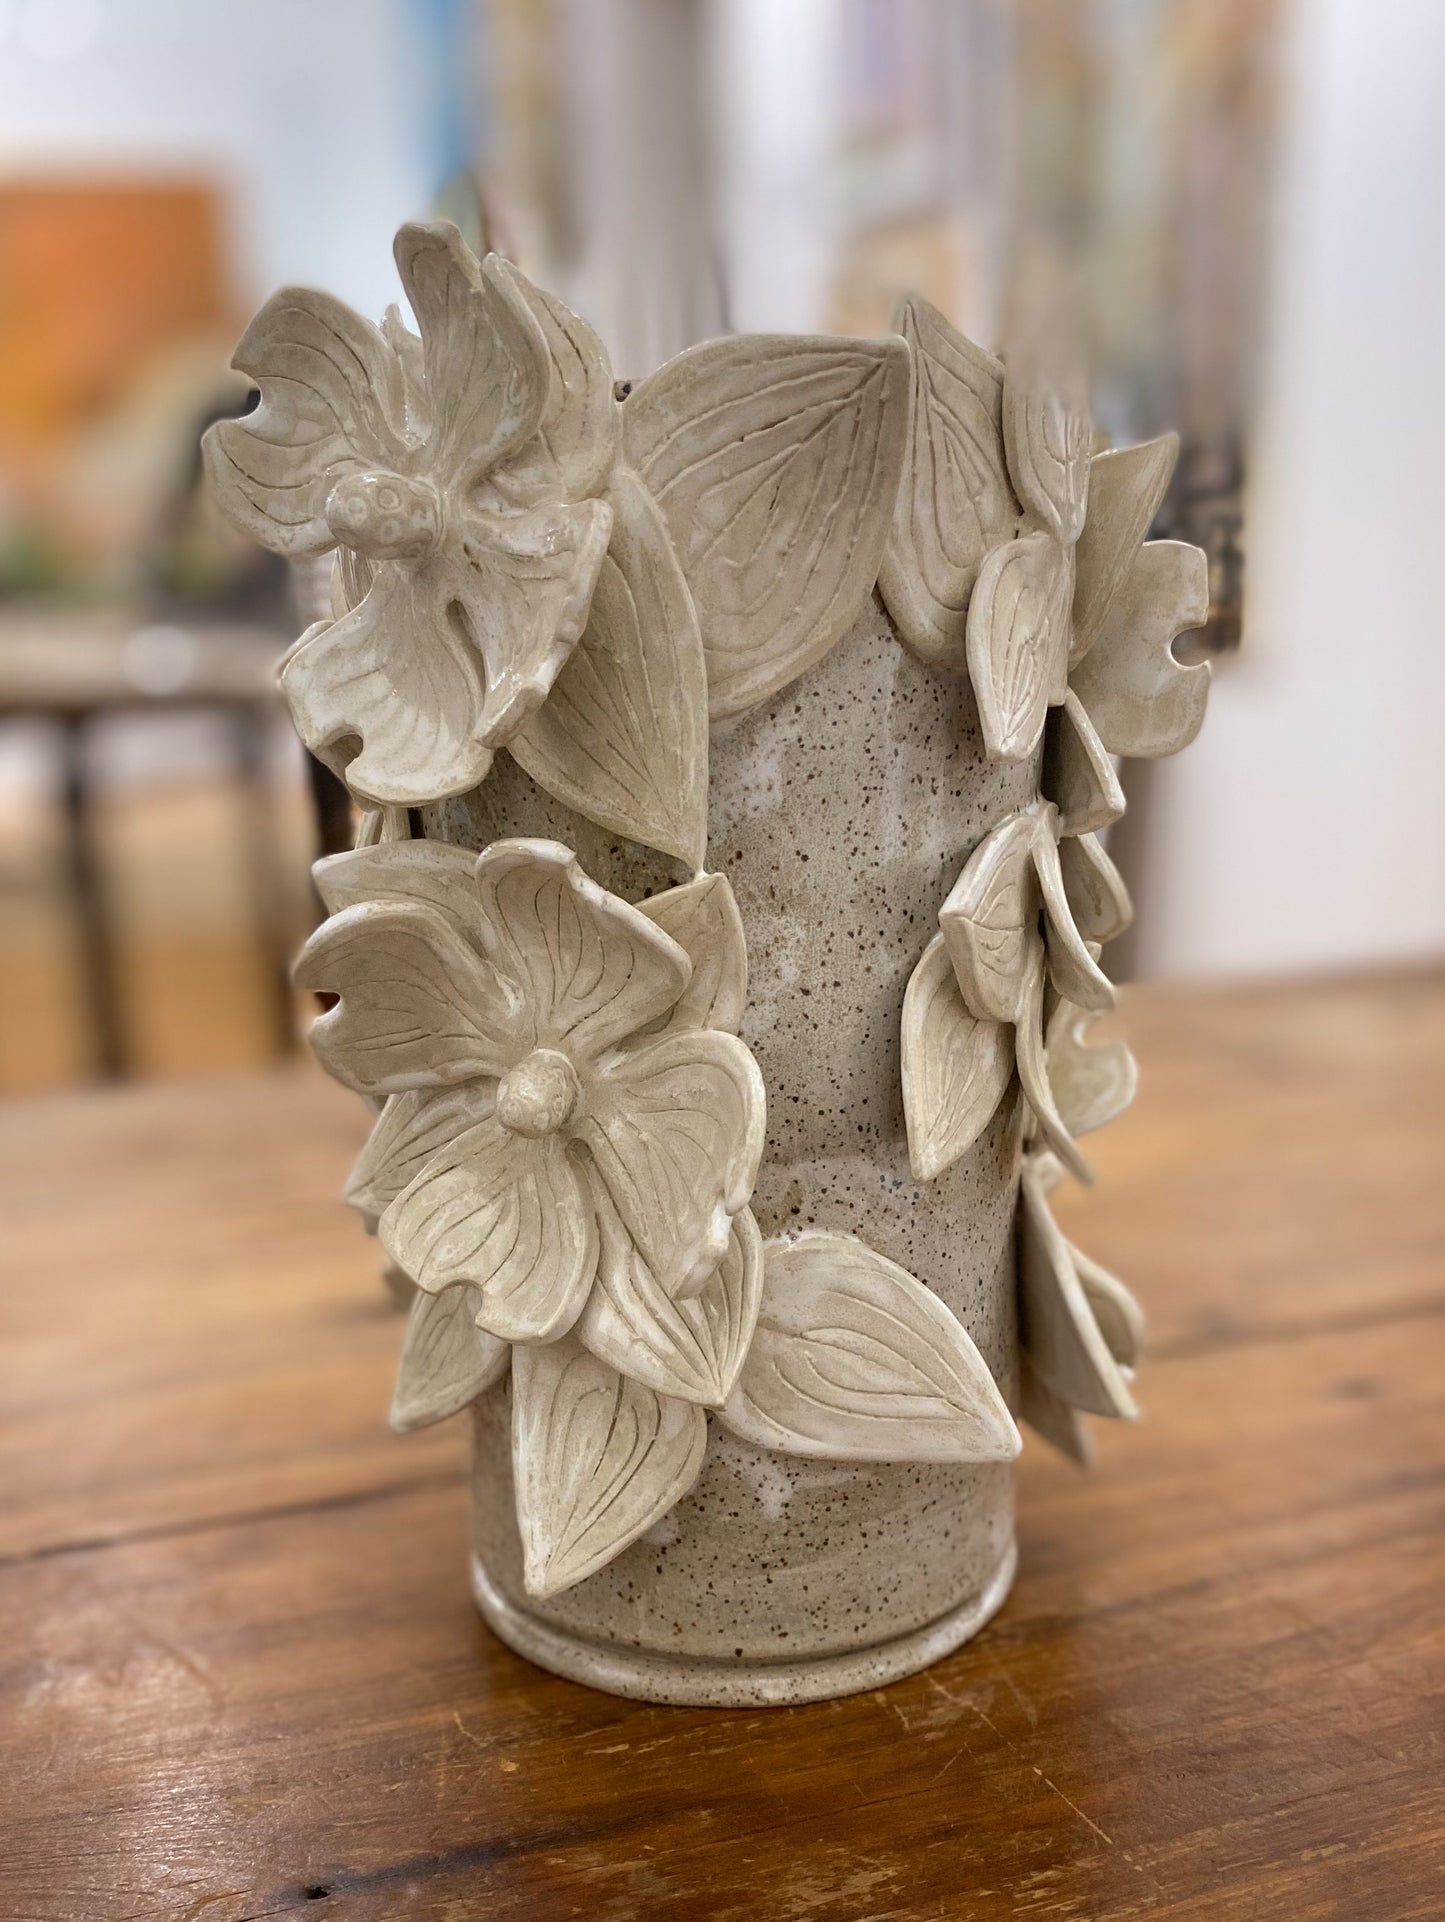 A In Full Bloom Series - Dogwood Extra Blossom Vase